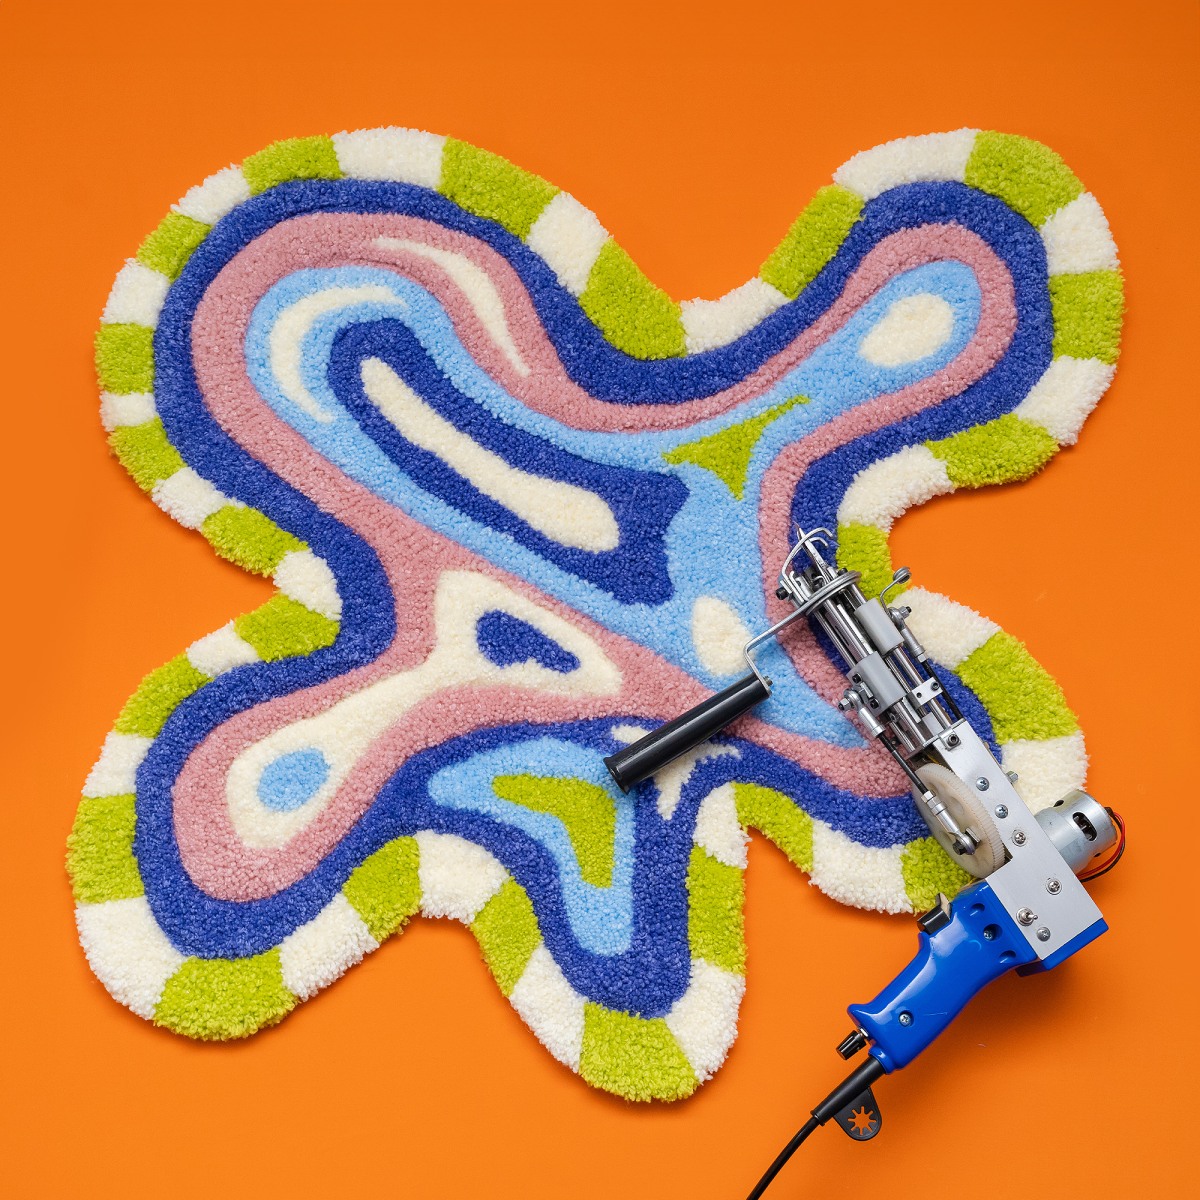 Online Course - Tufting-Gun Tapestry with Felt and Embroidery (Alex Rocca)